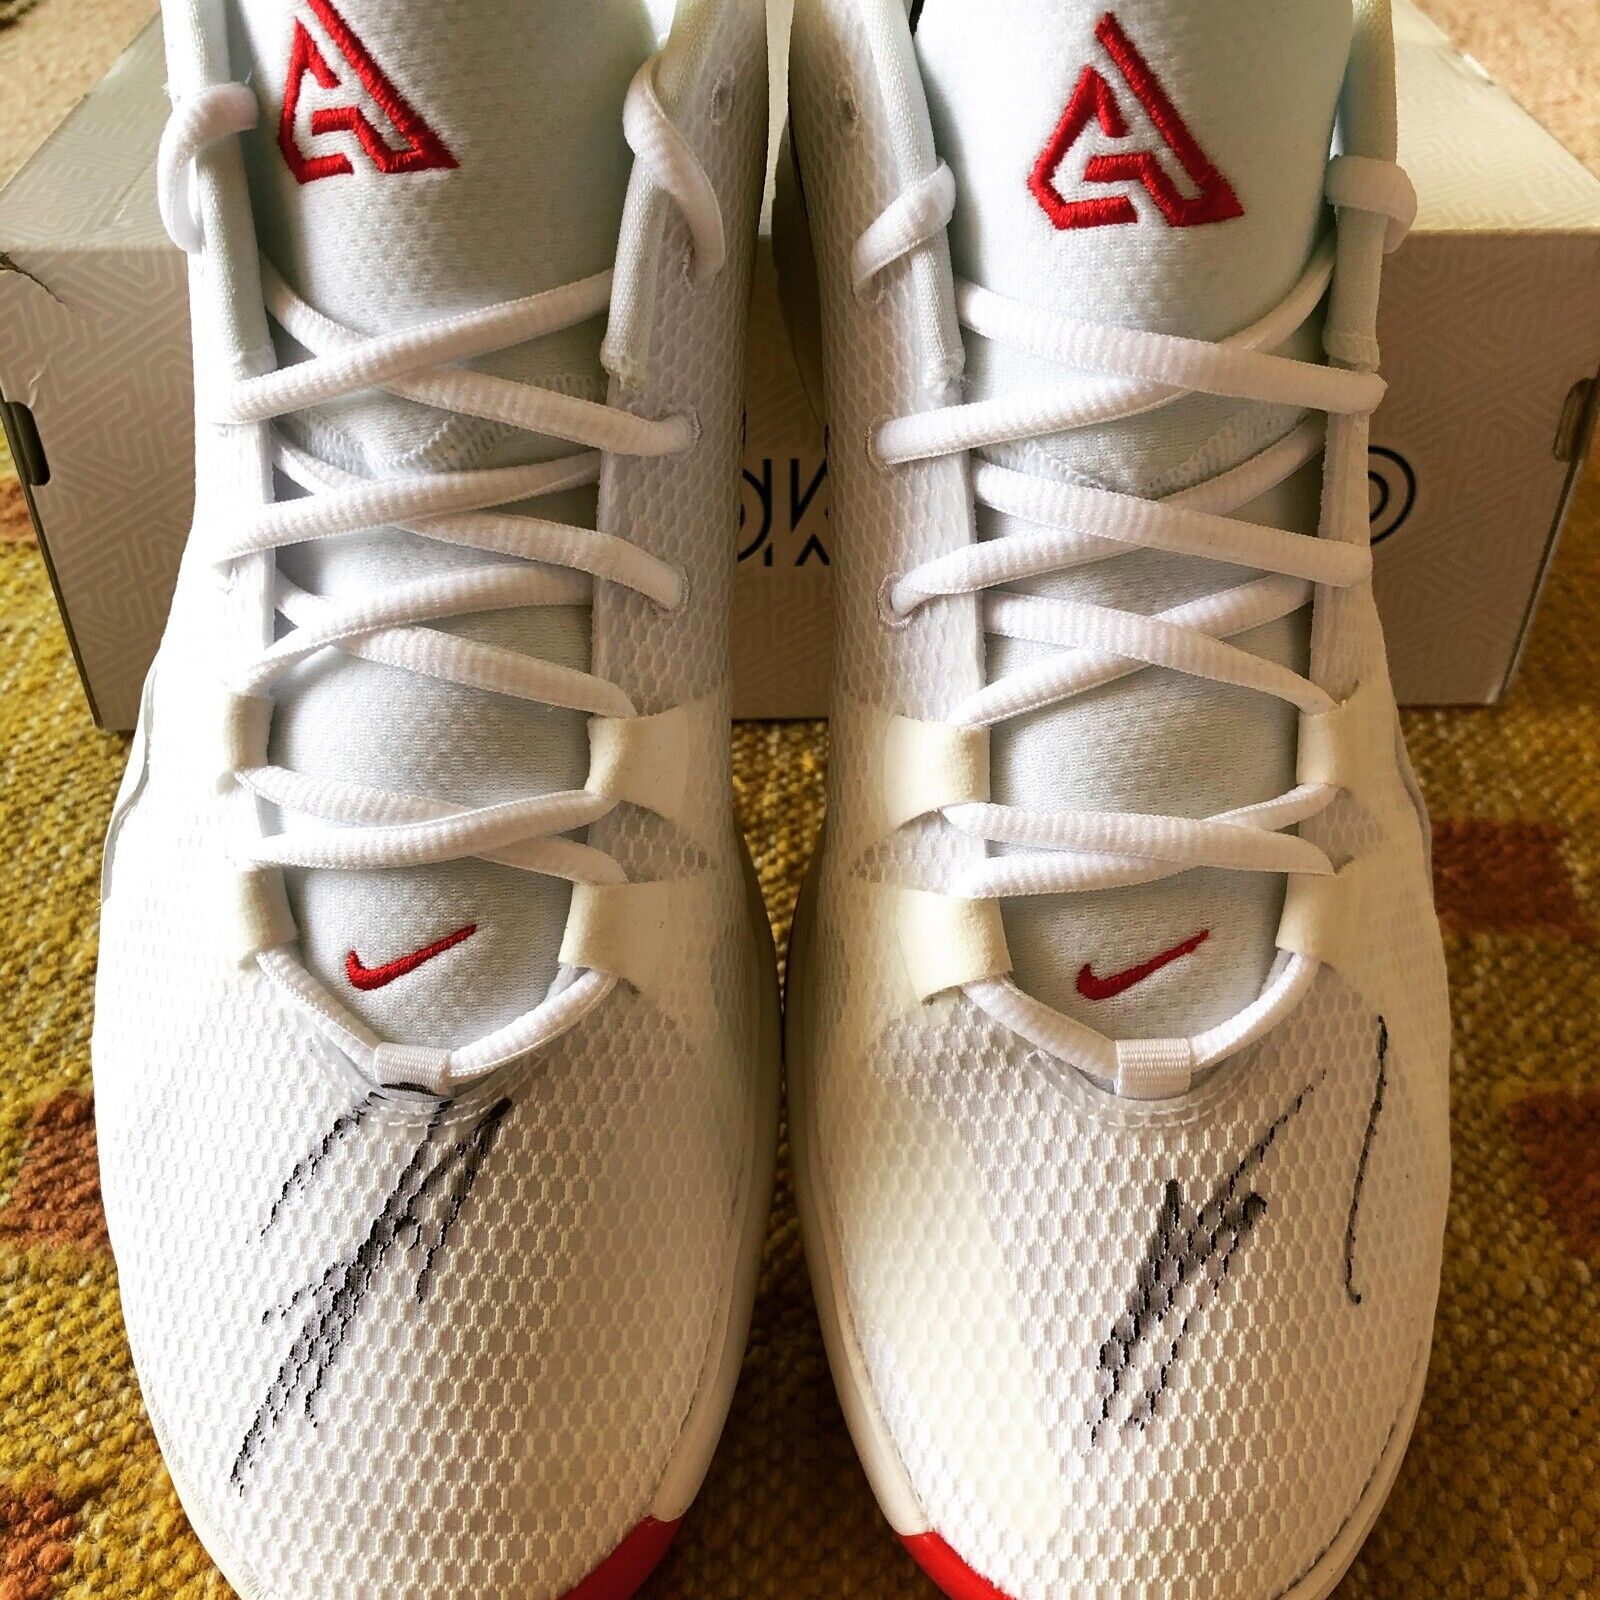 Giannis Direct stock discount Antetokounmpo Signed Autograph Nike Shoes R 1 Freak Zoom Excellence